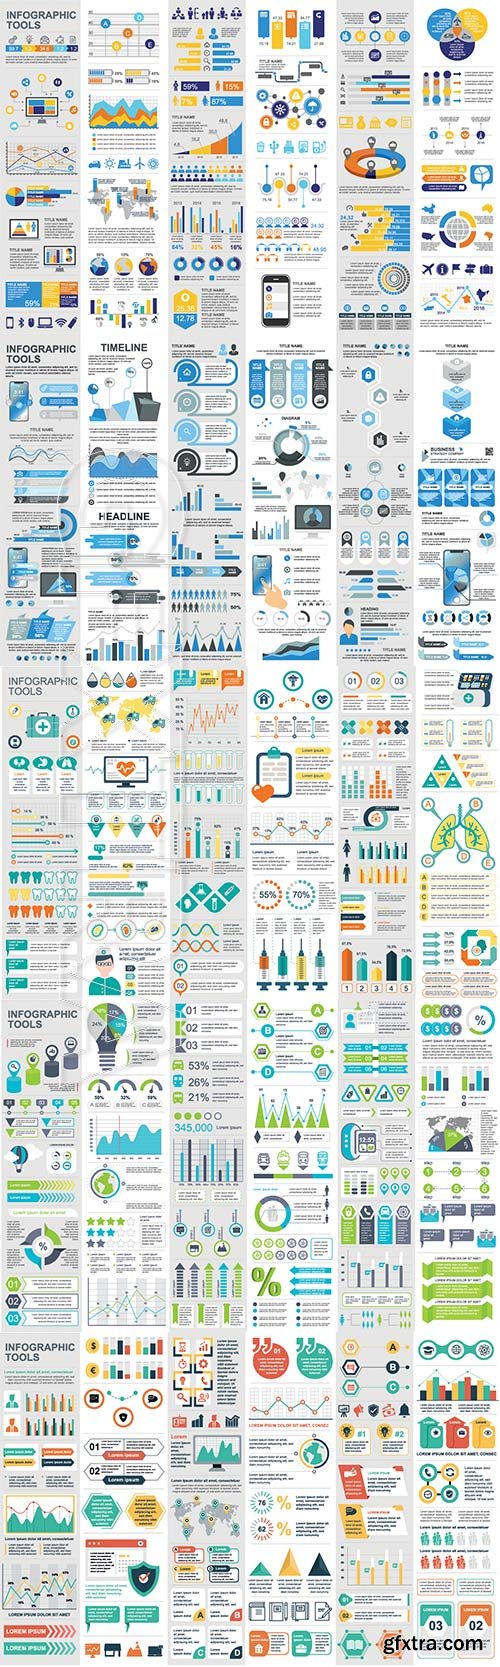 Infographic elements data visualization vector # 2